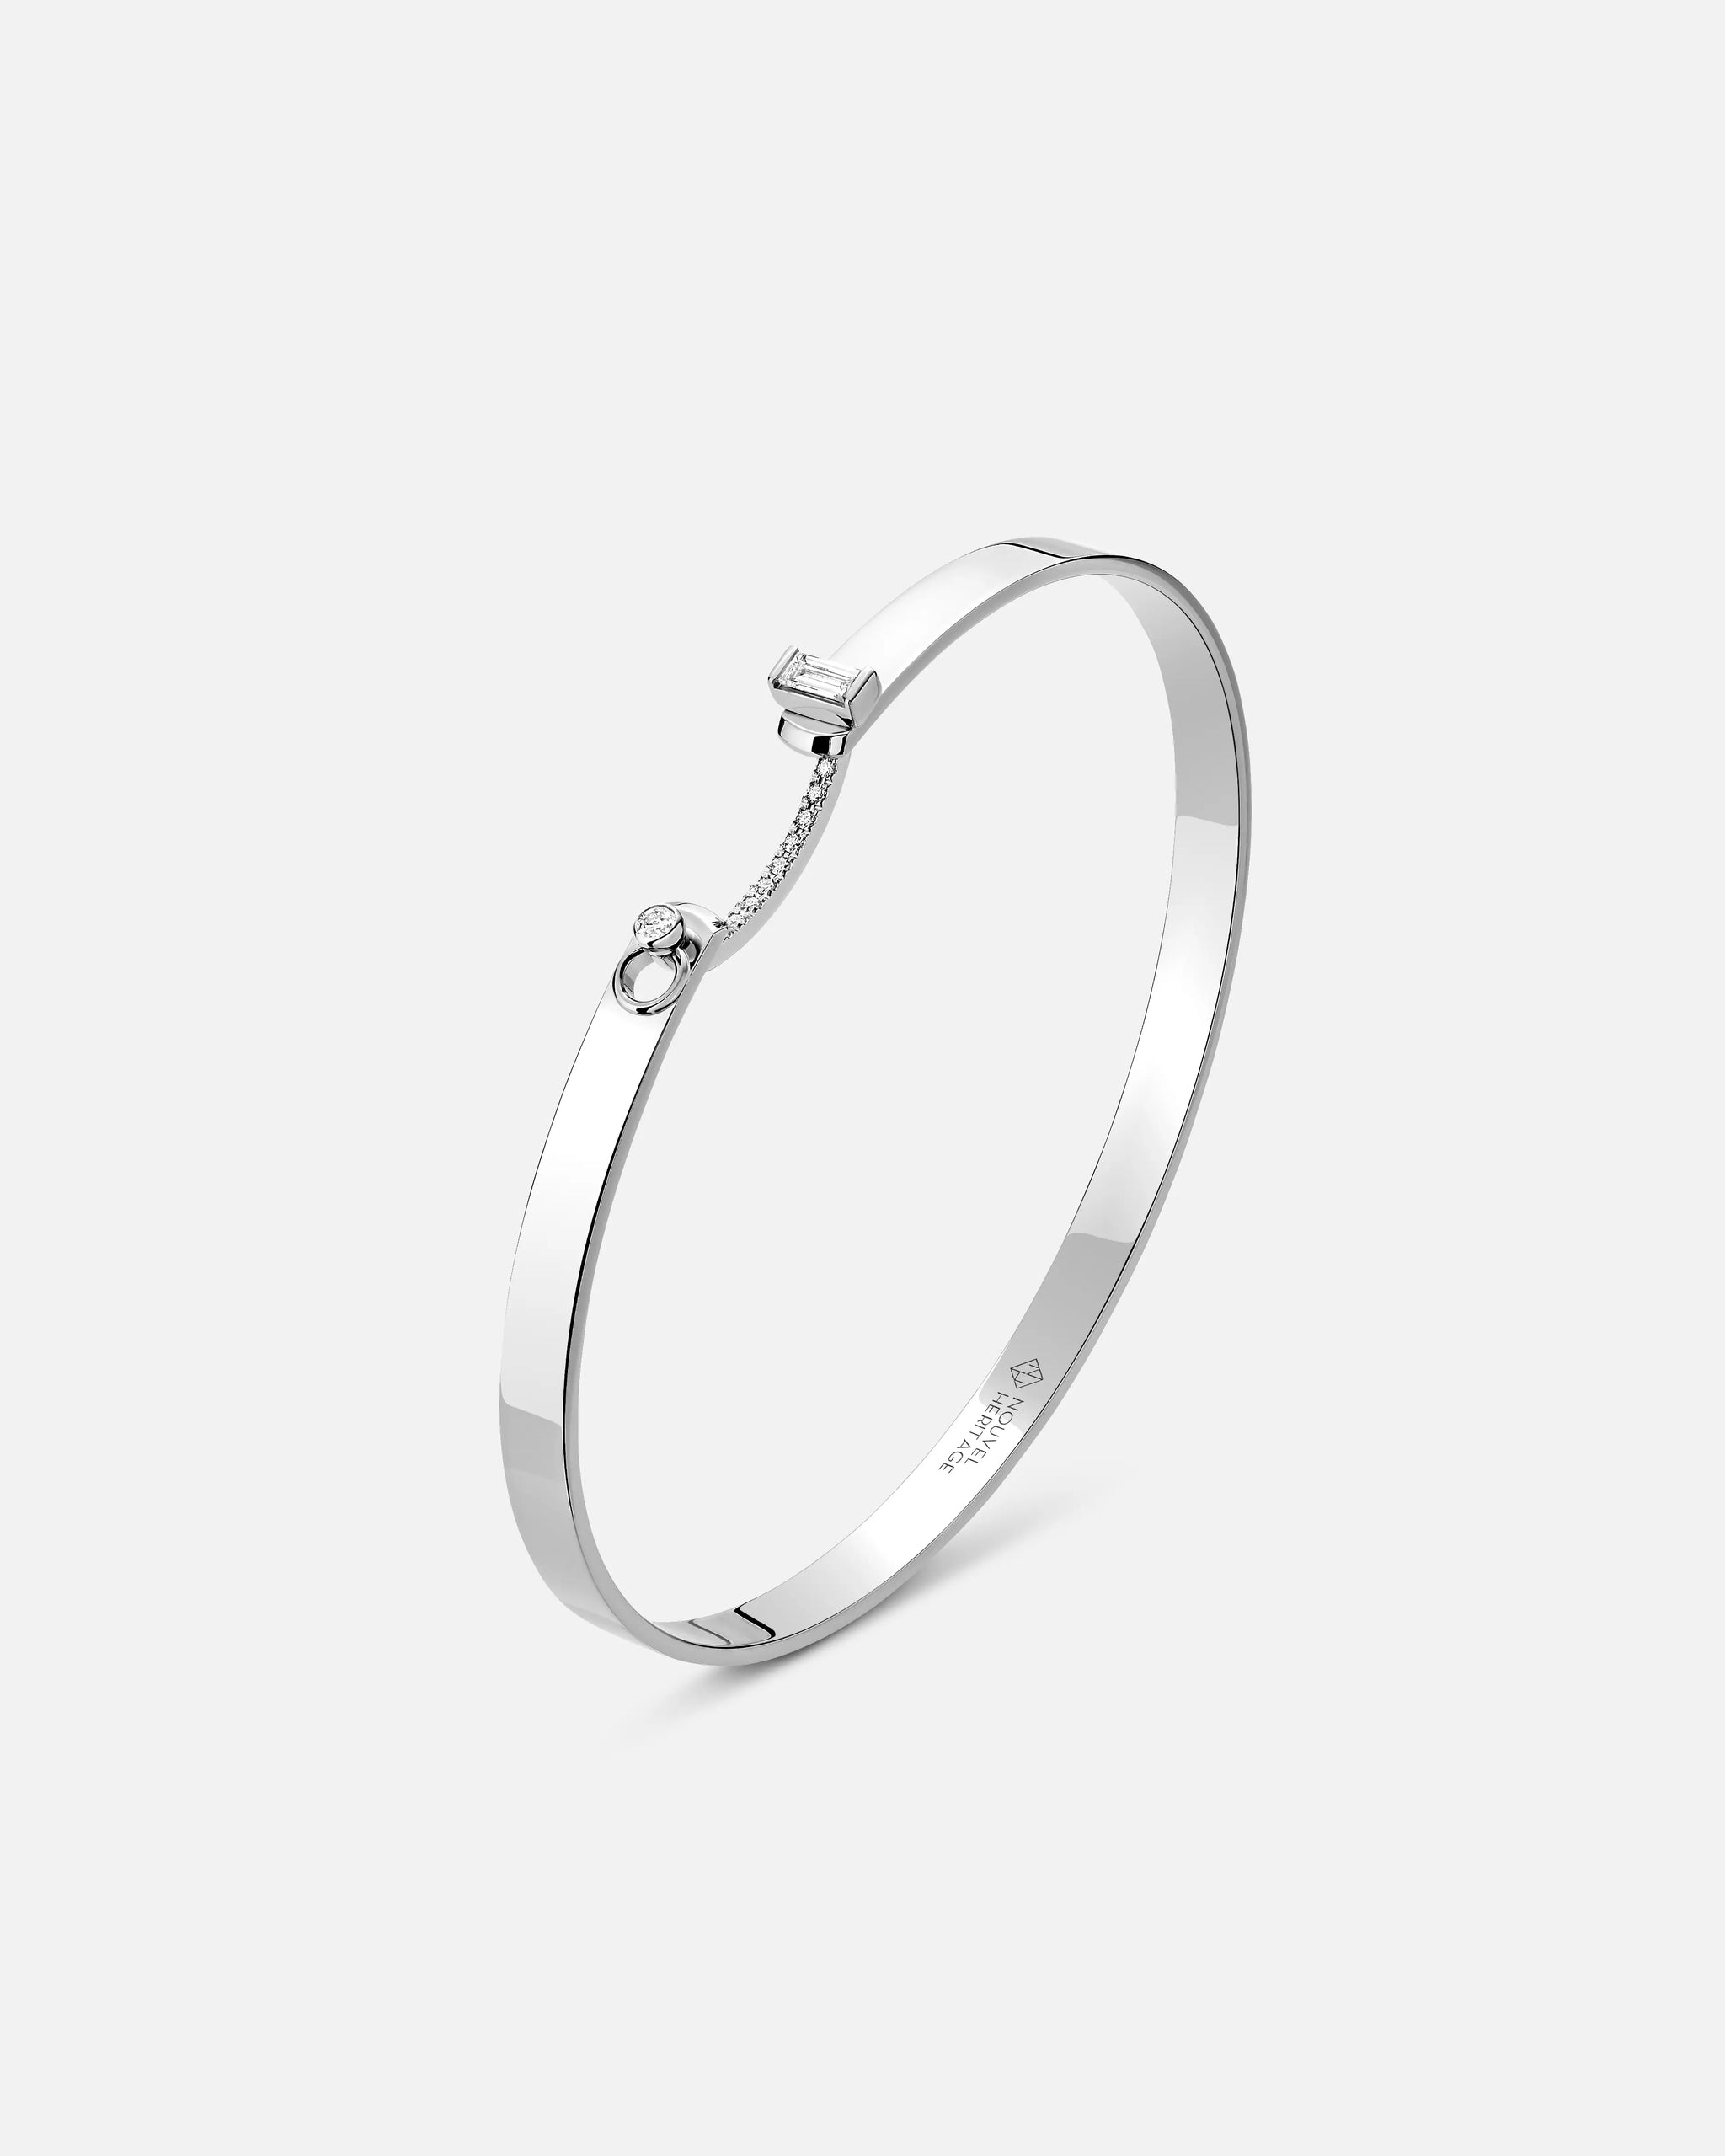 Dinner Date Mood Bangle in White Gold - 1 - Nouvel Heritage